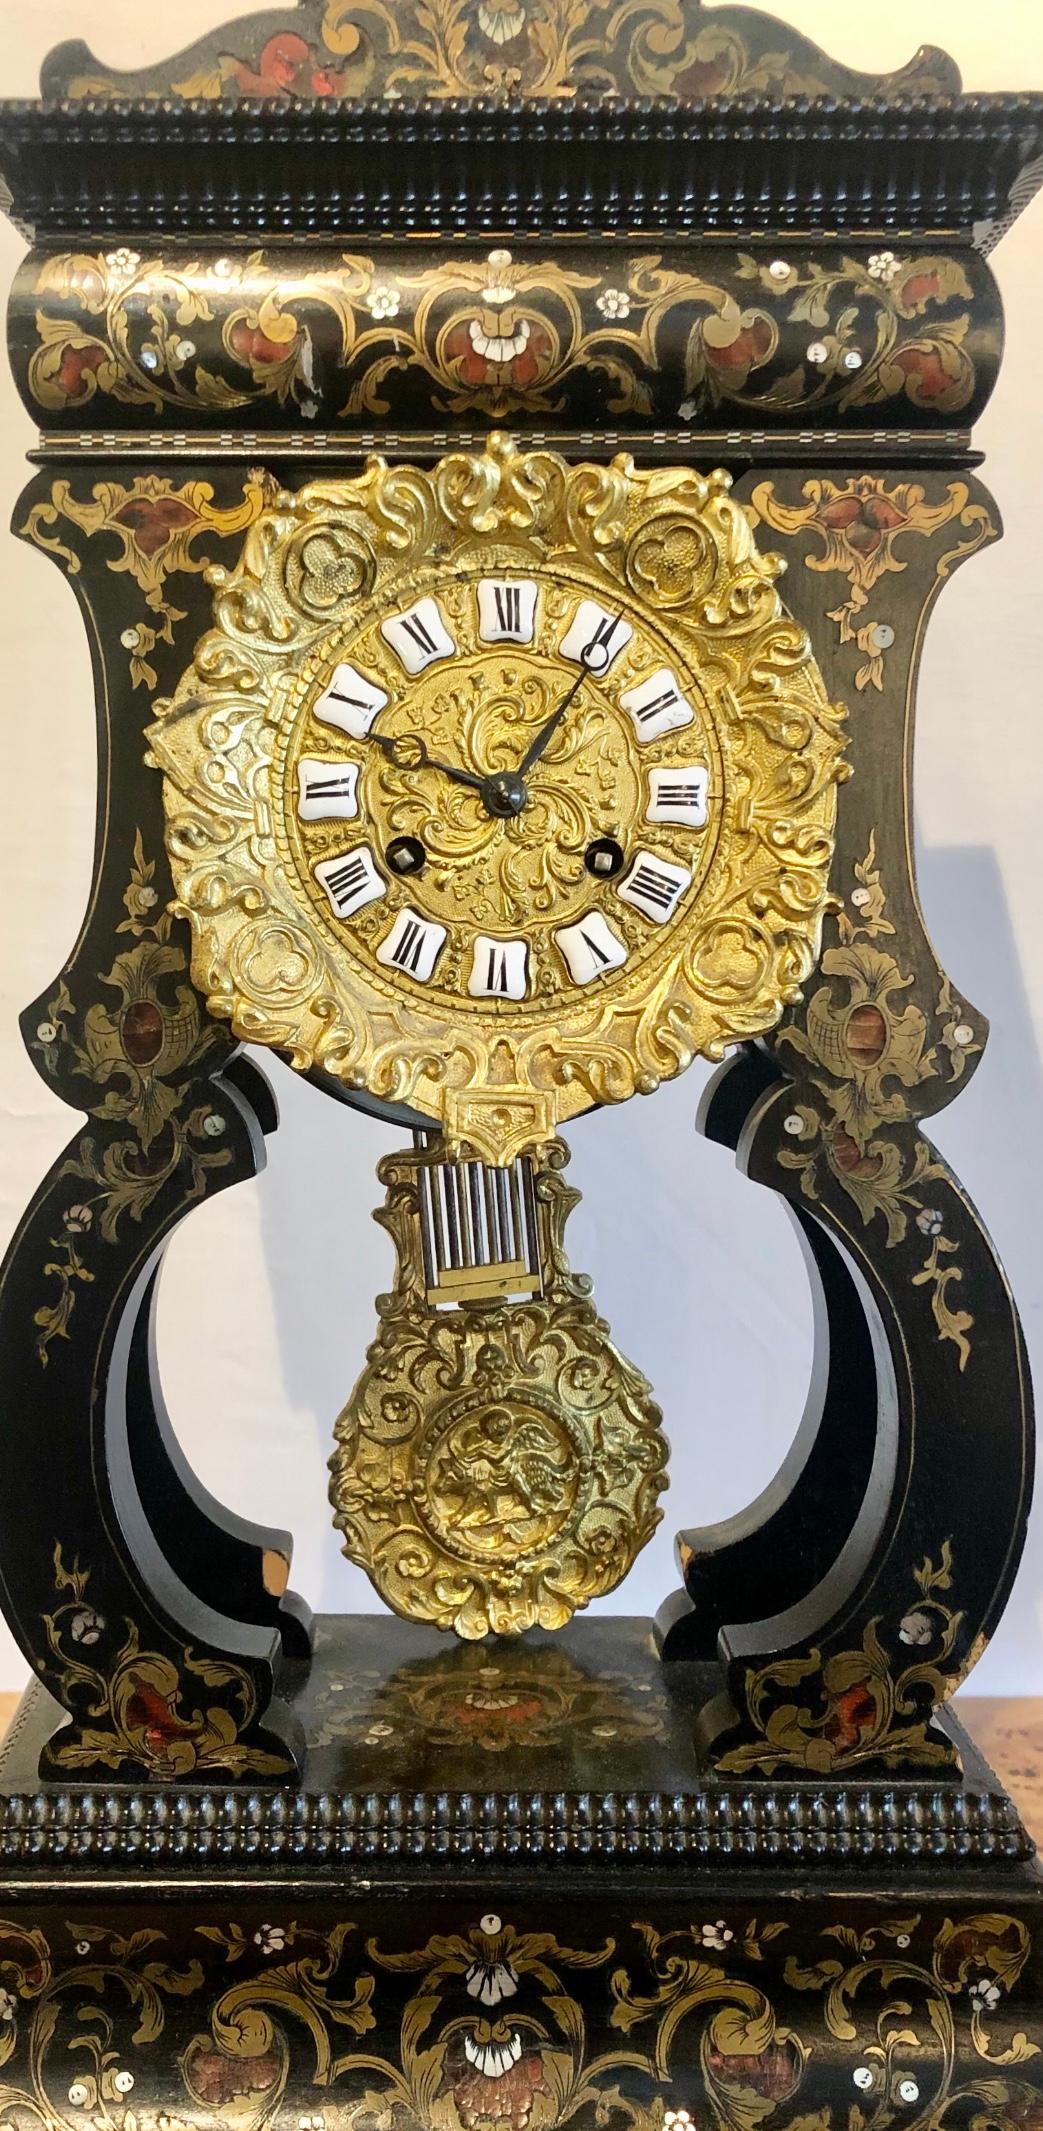 19th century mantle clock Louis Philippe ebony and boule inlaid. The fine and very decorative mantle clock has ornate bronze work with a bronze pendulum. Not working at this time.
ZZL.